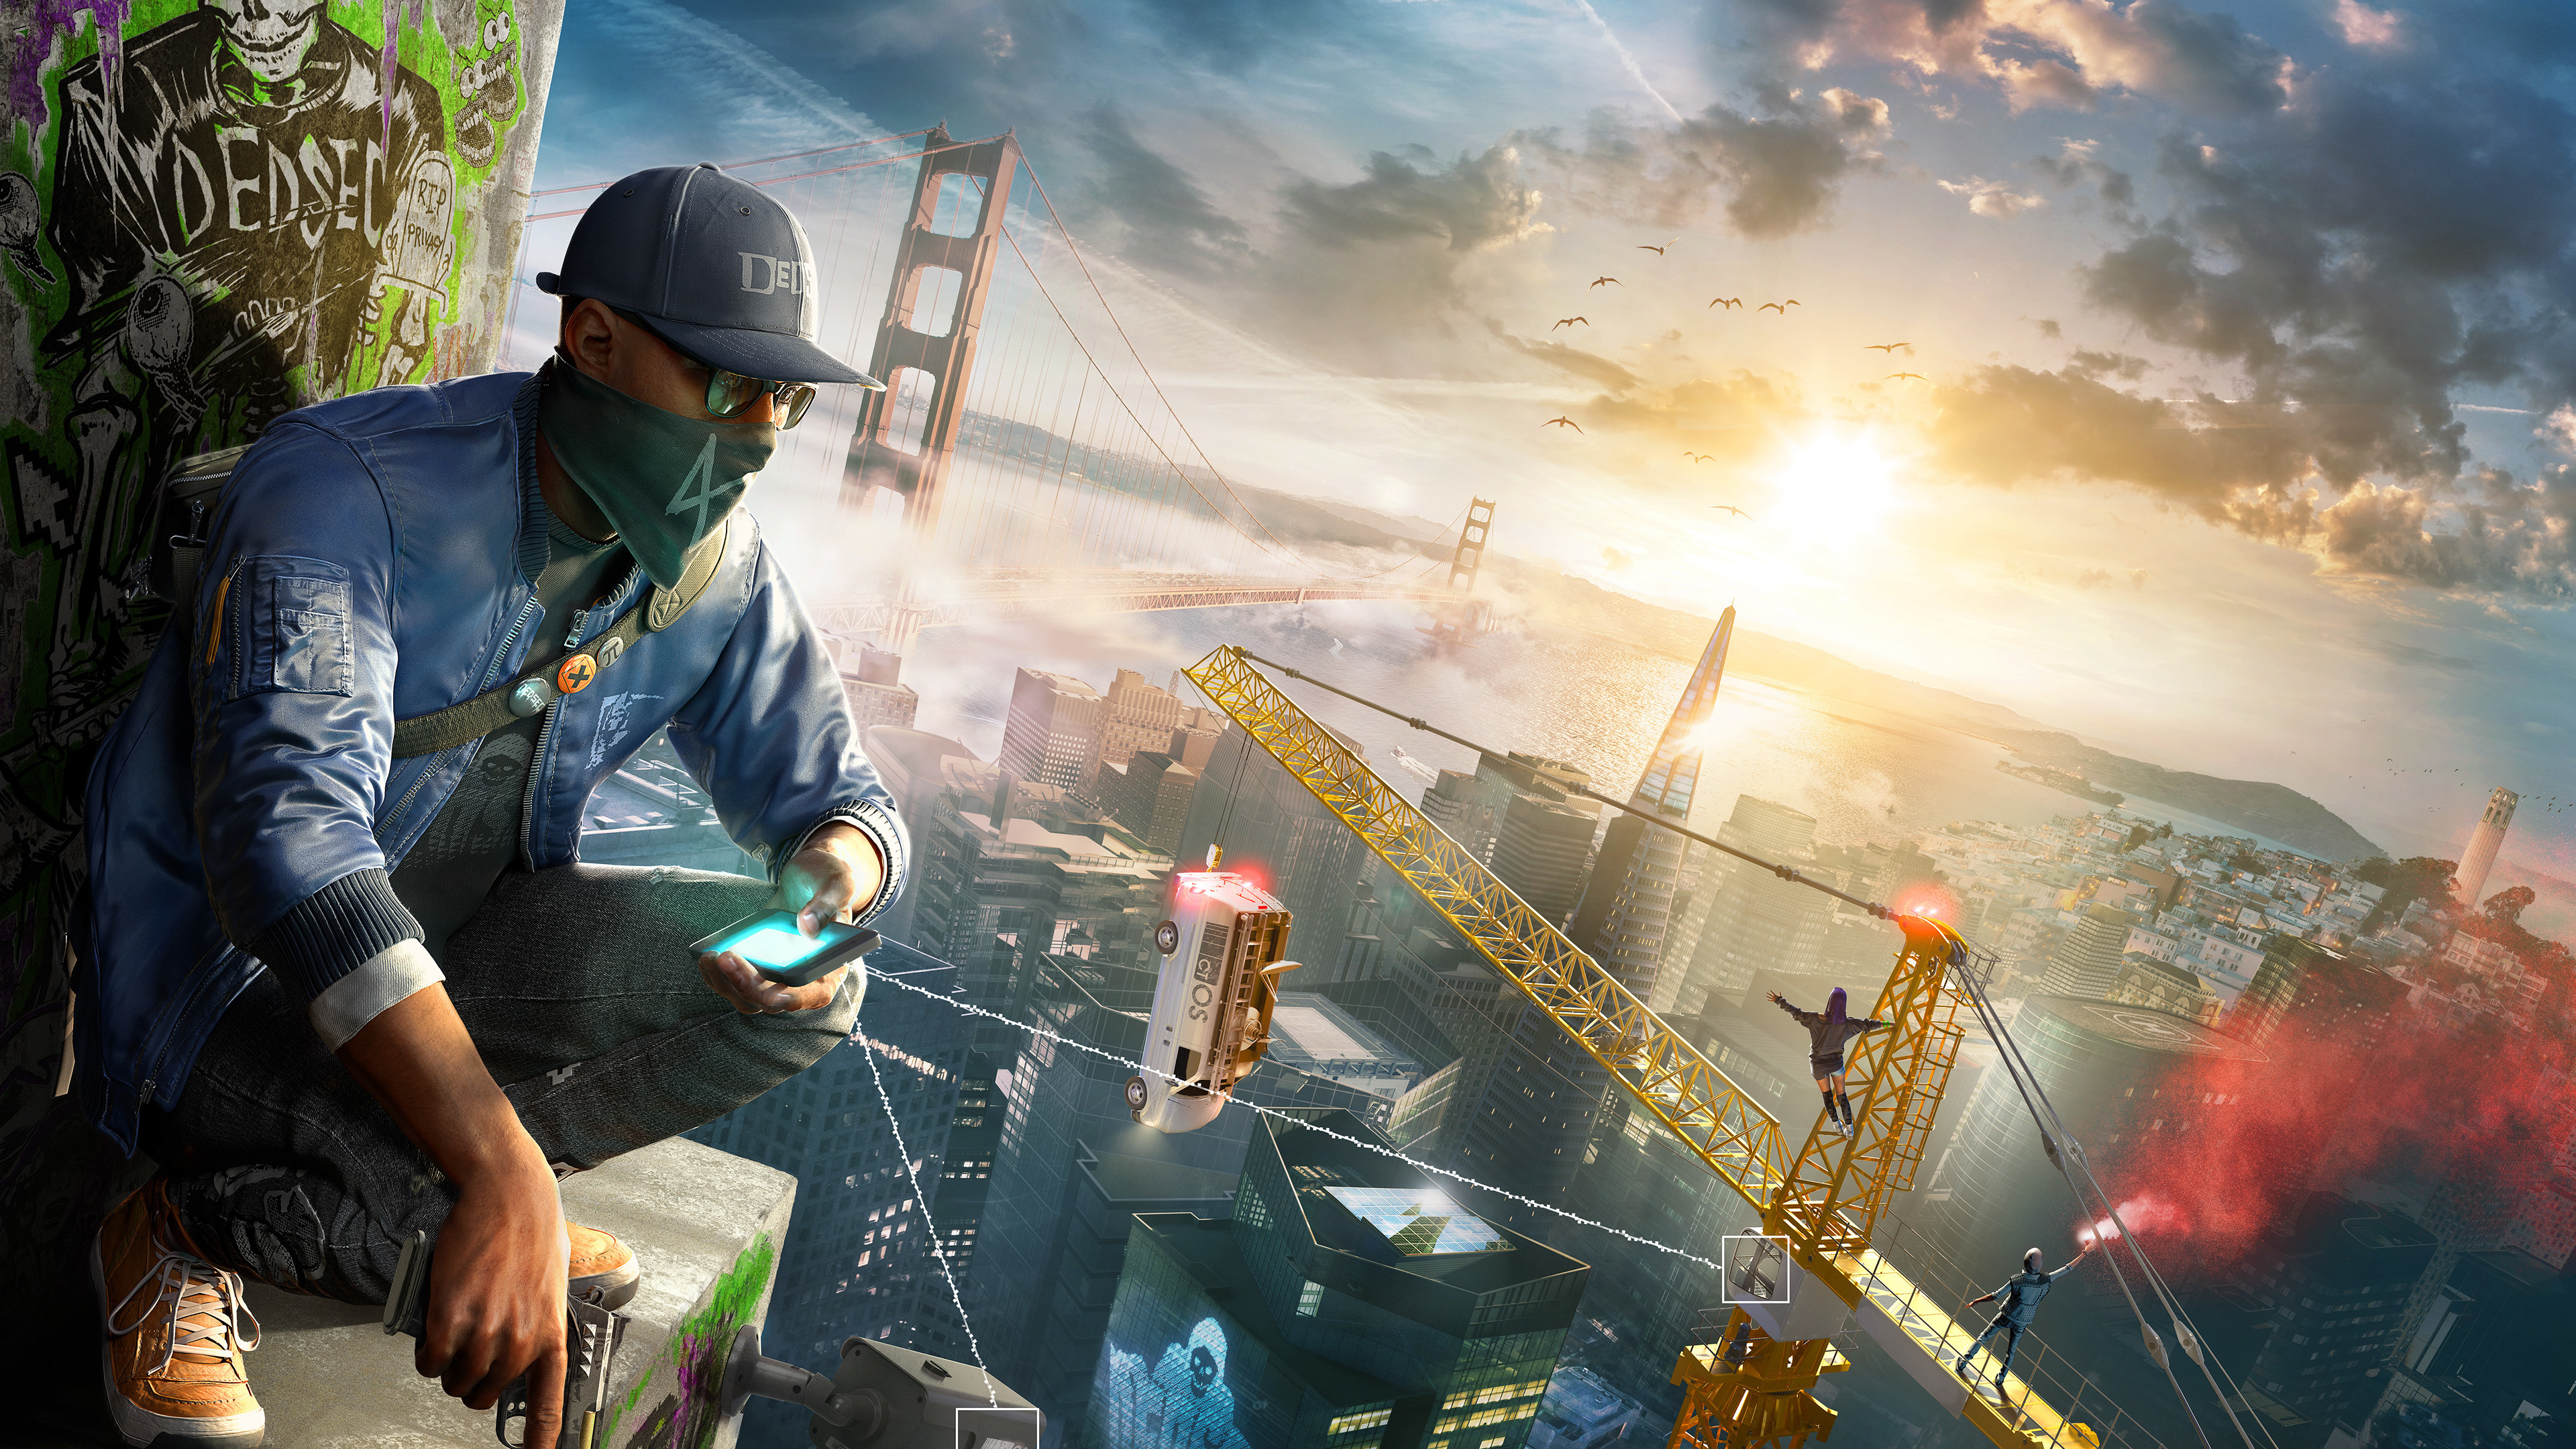 Watch Dogs 2, Watch Dogs, Ubisoft, Playstation 4, pc Game. Wallpaper in 3840x2160 Resolution